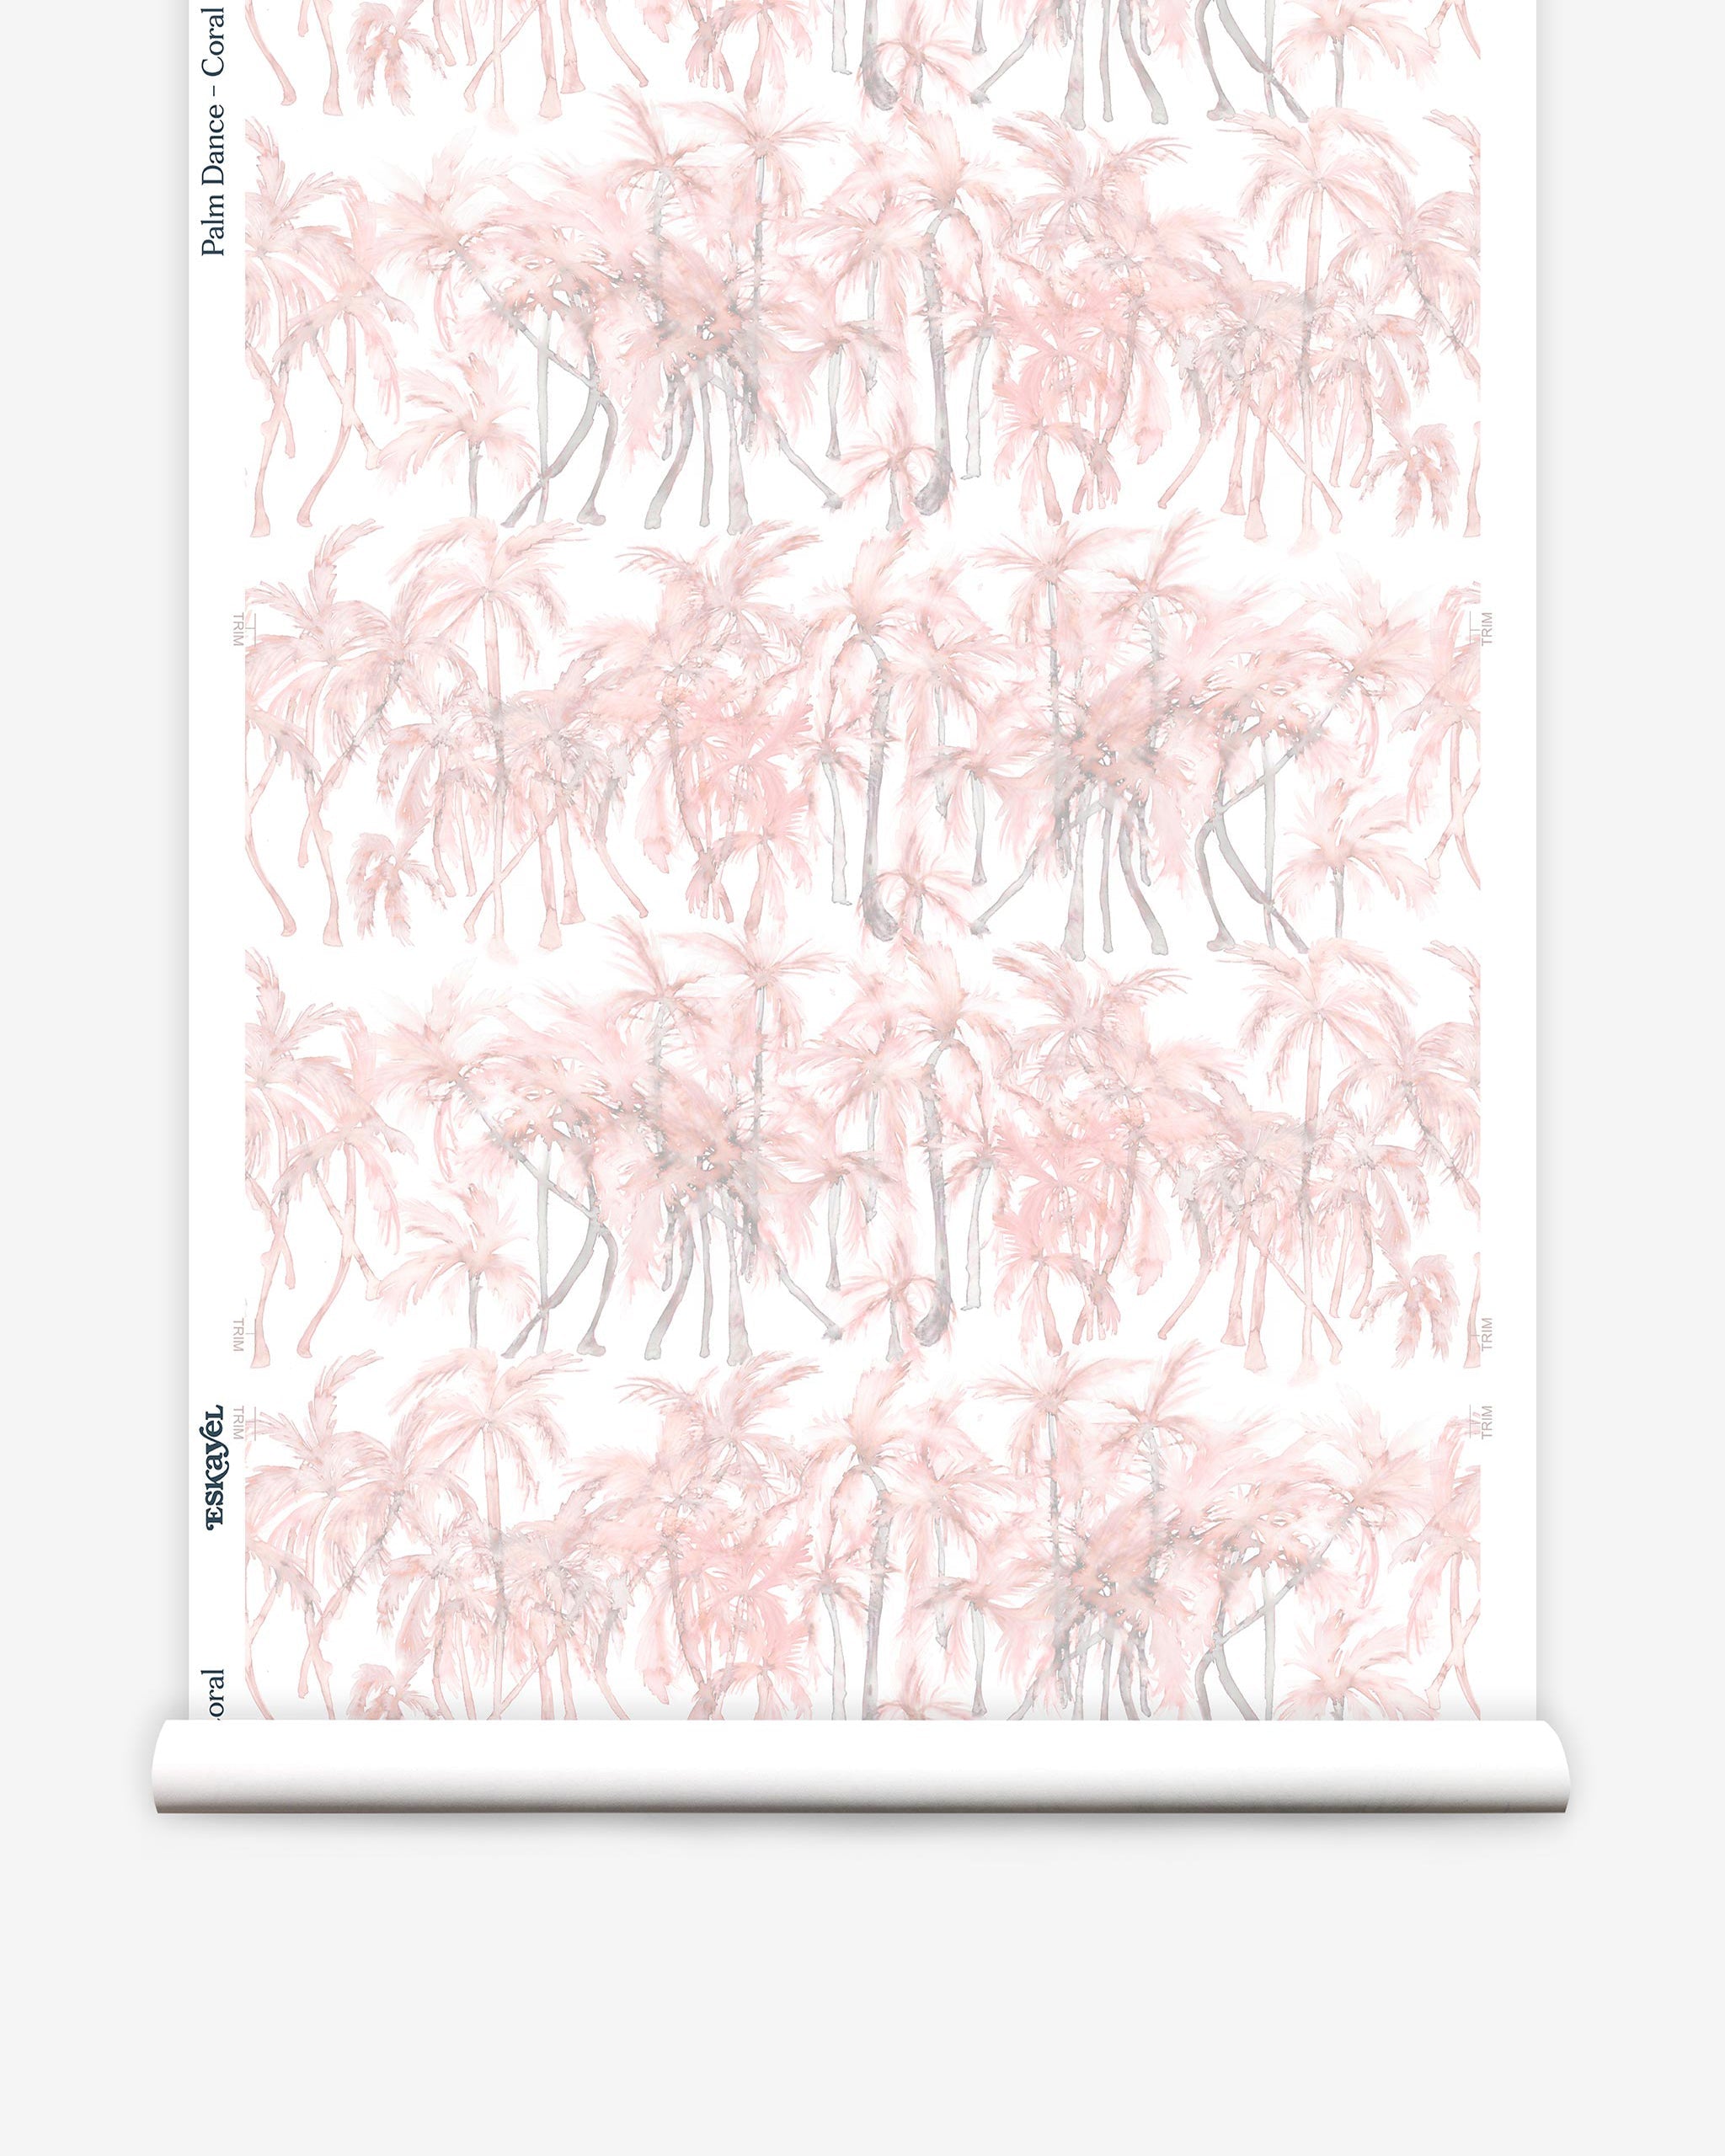 Partially unrolled wallpaper yardage in a painterly palm tree stripe print in pink, gray and white.